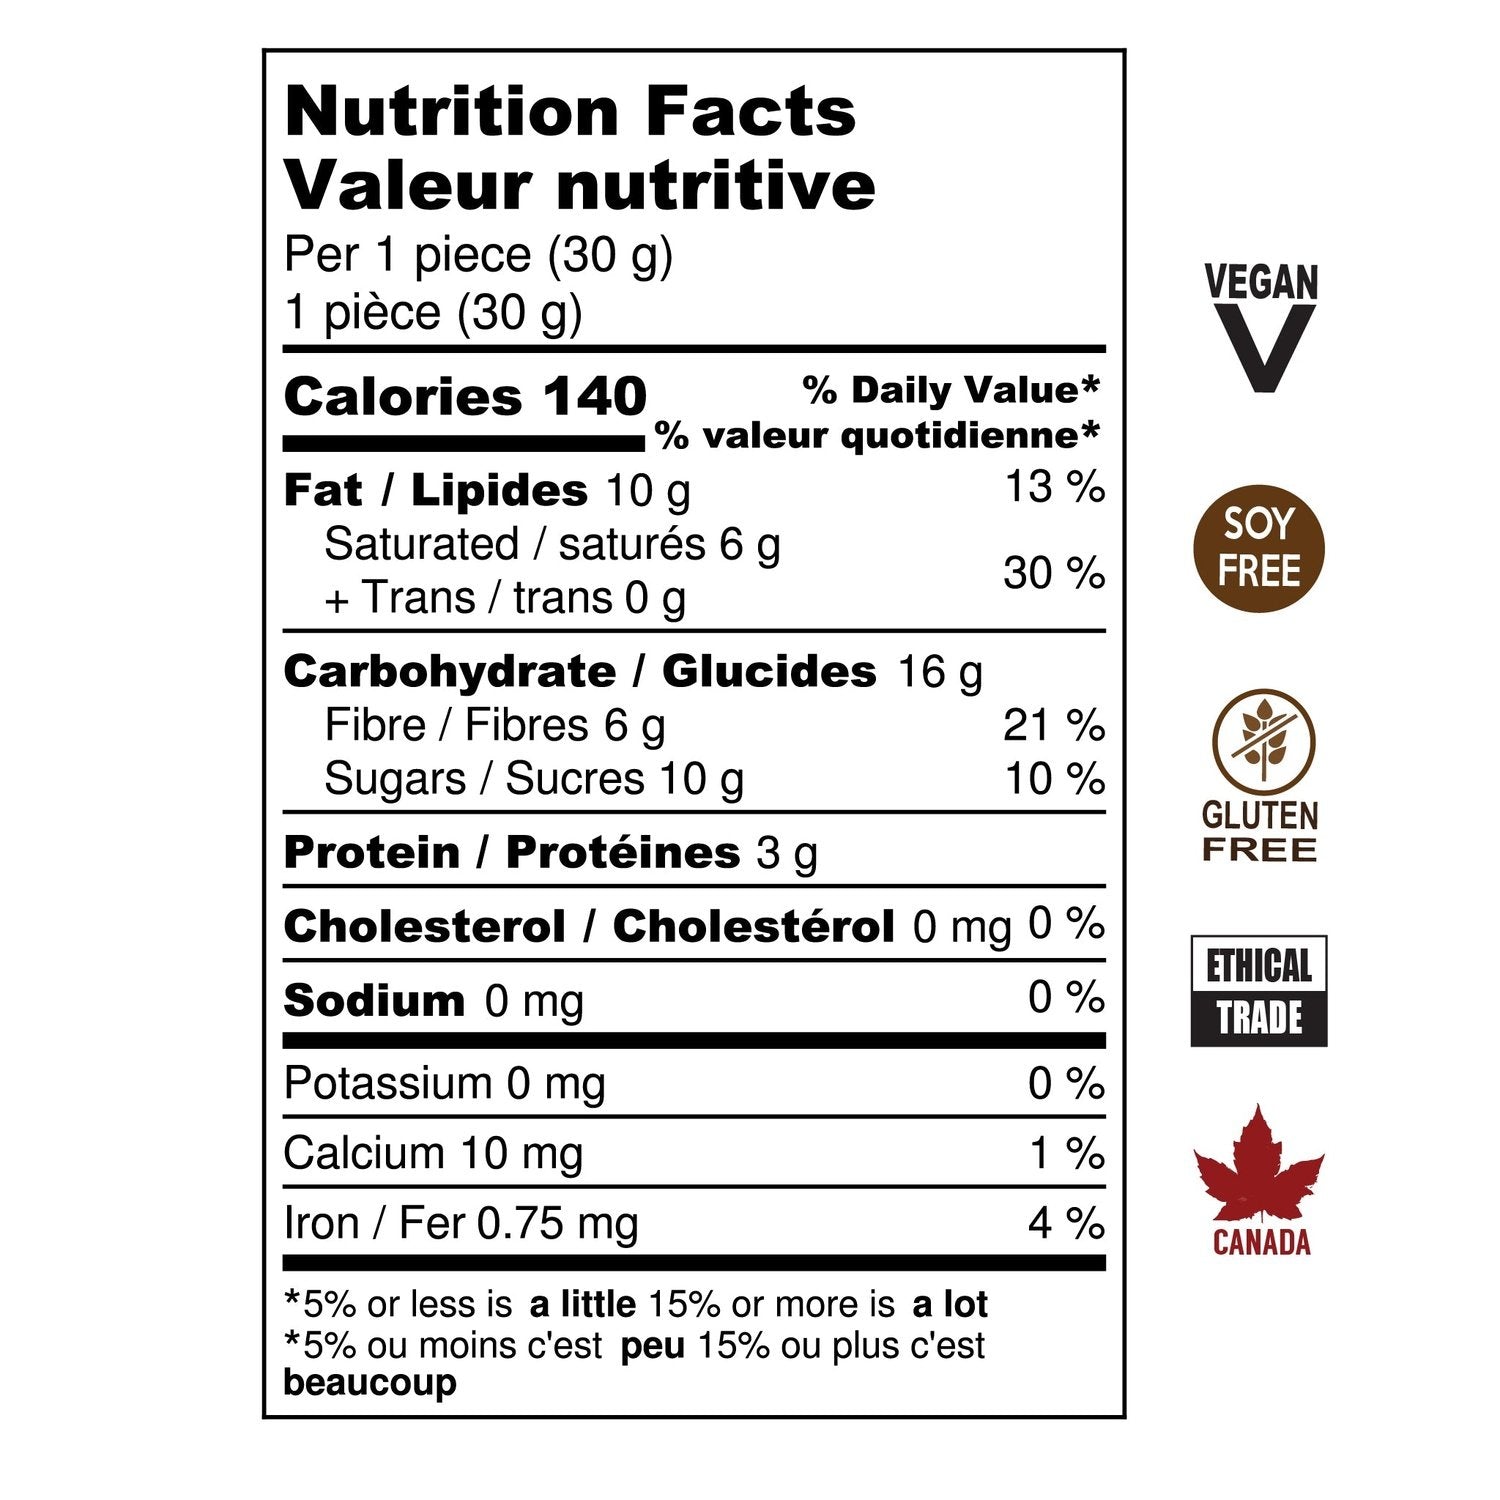 Nutrition Facts for Hispaniola Drinking Cohcolate. Soy Free, Gluten Free, Ethical Trade, Vegan, Made in Canada.